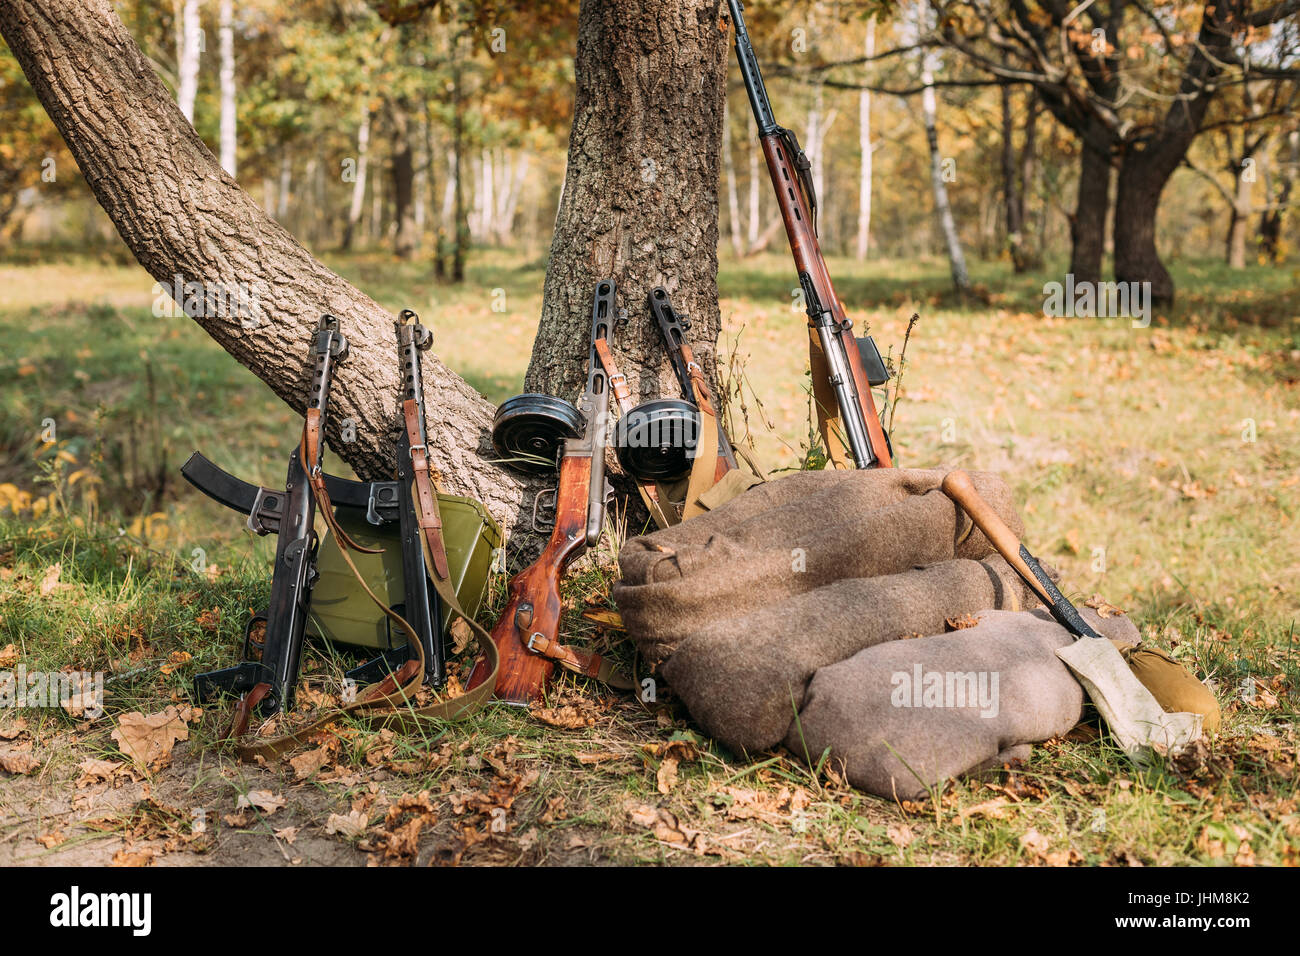 Soviet Russian Military Ammunition Weapon Of World War II. PPS-43, PPSh-41 Submachine Gun And SKS Rifle Leaning Against Trunk Of Tree. Weapon Of Red A Stock Photo